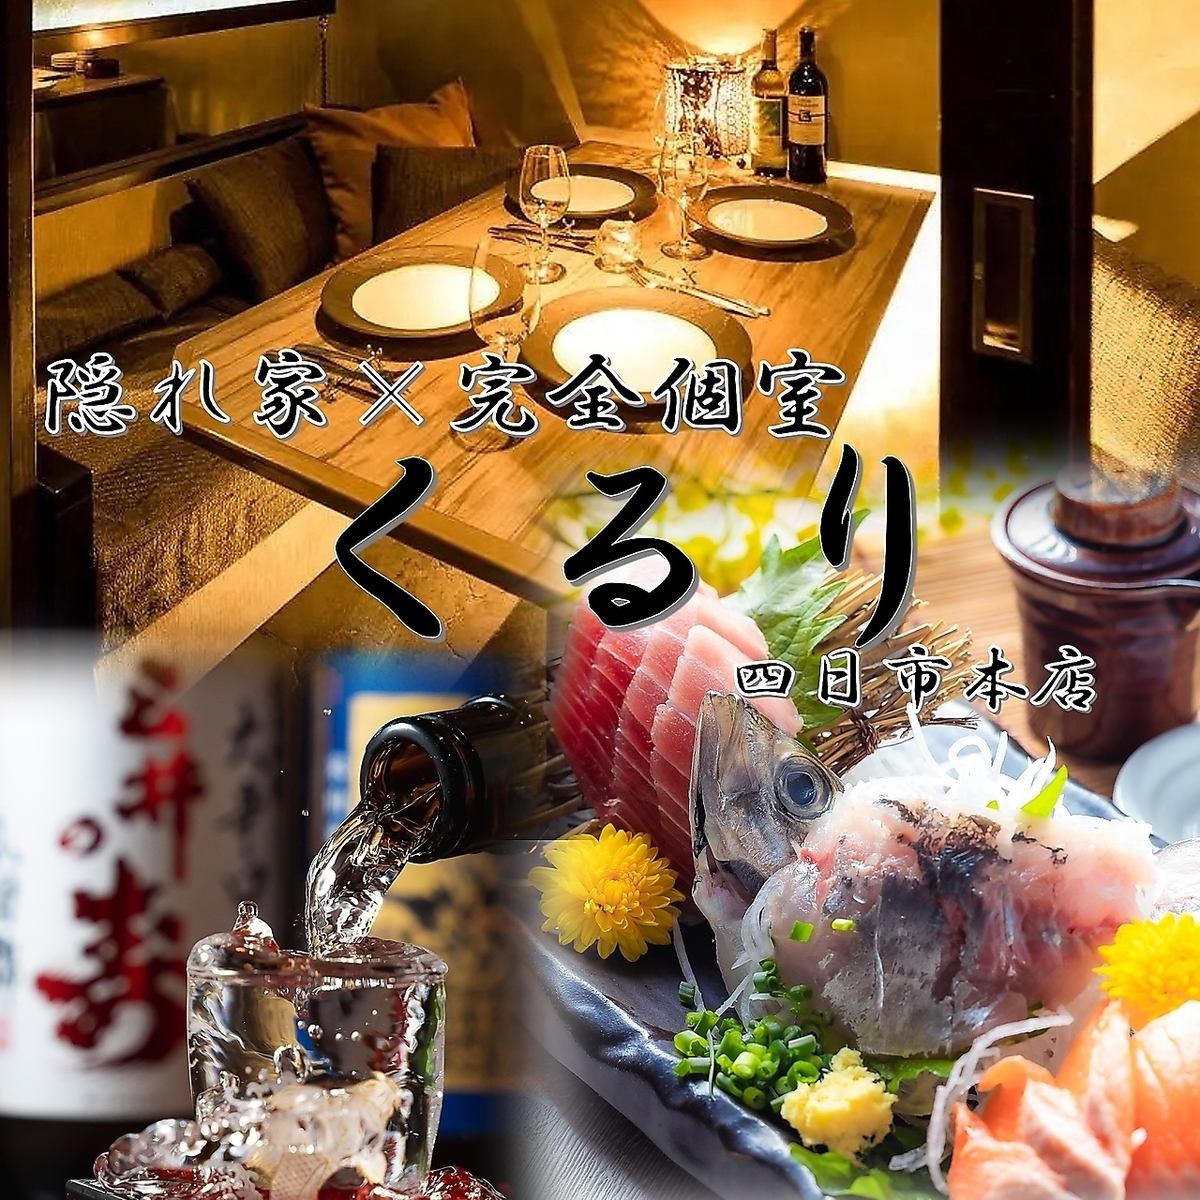 A bar with private rooms that boasts creative Japanese cuisine♪Beer and highballs◎Popular for parties, birthdays and girls' night out◎